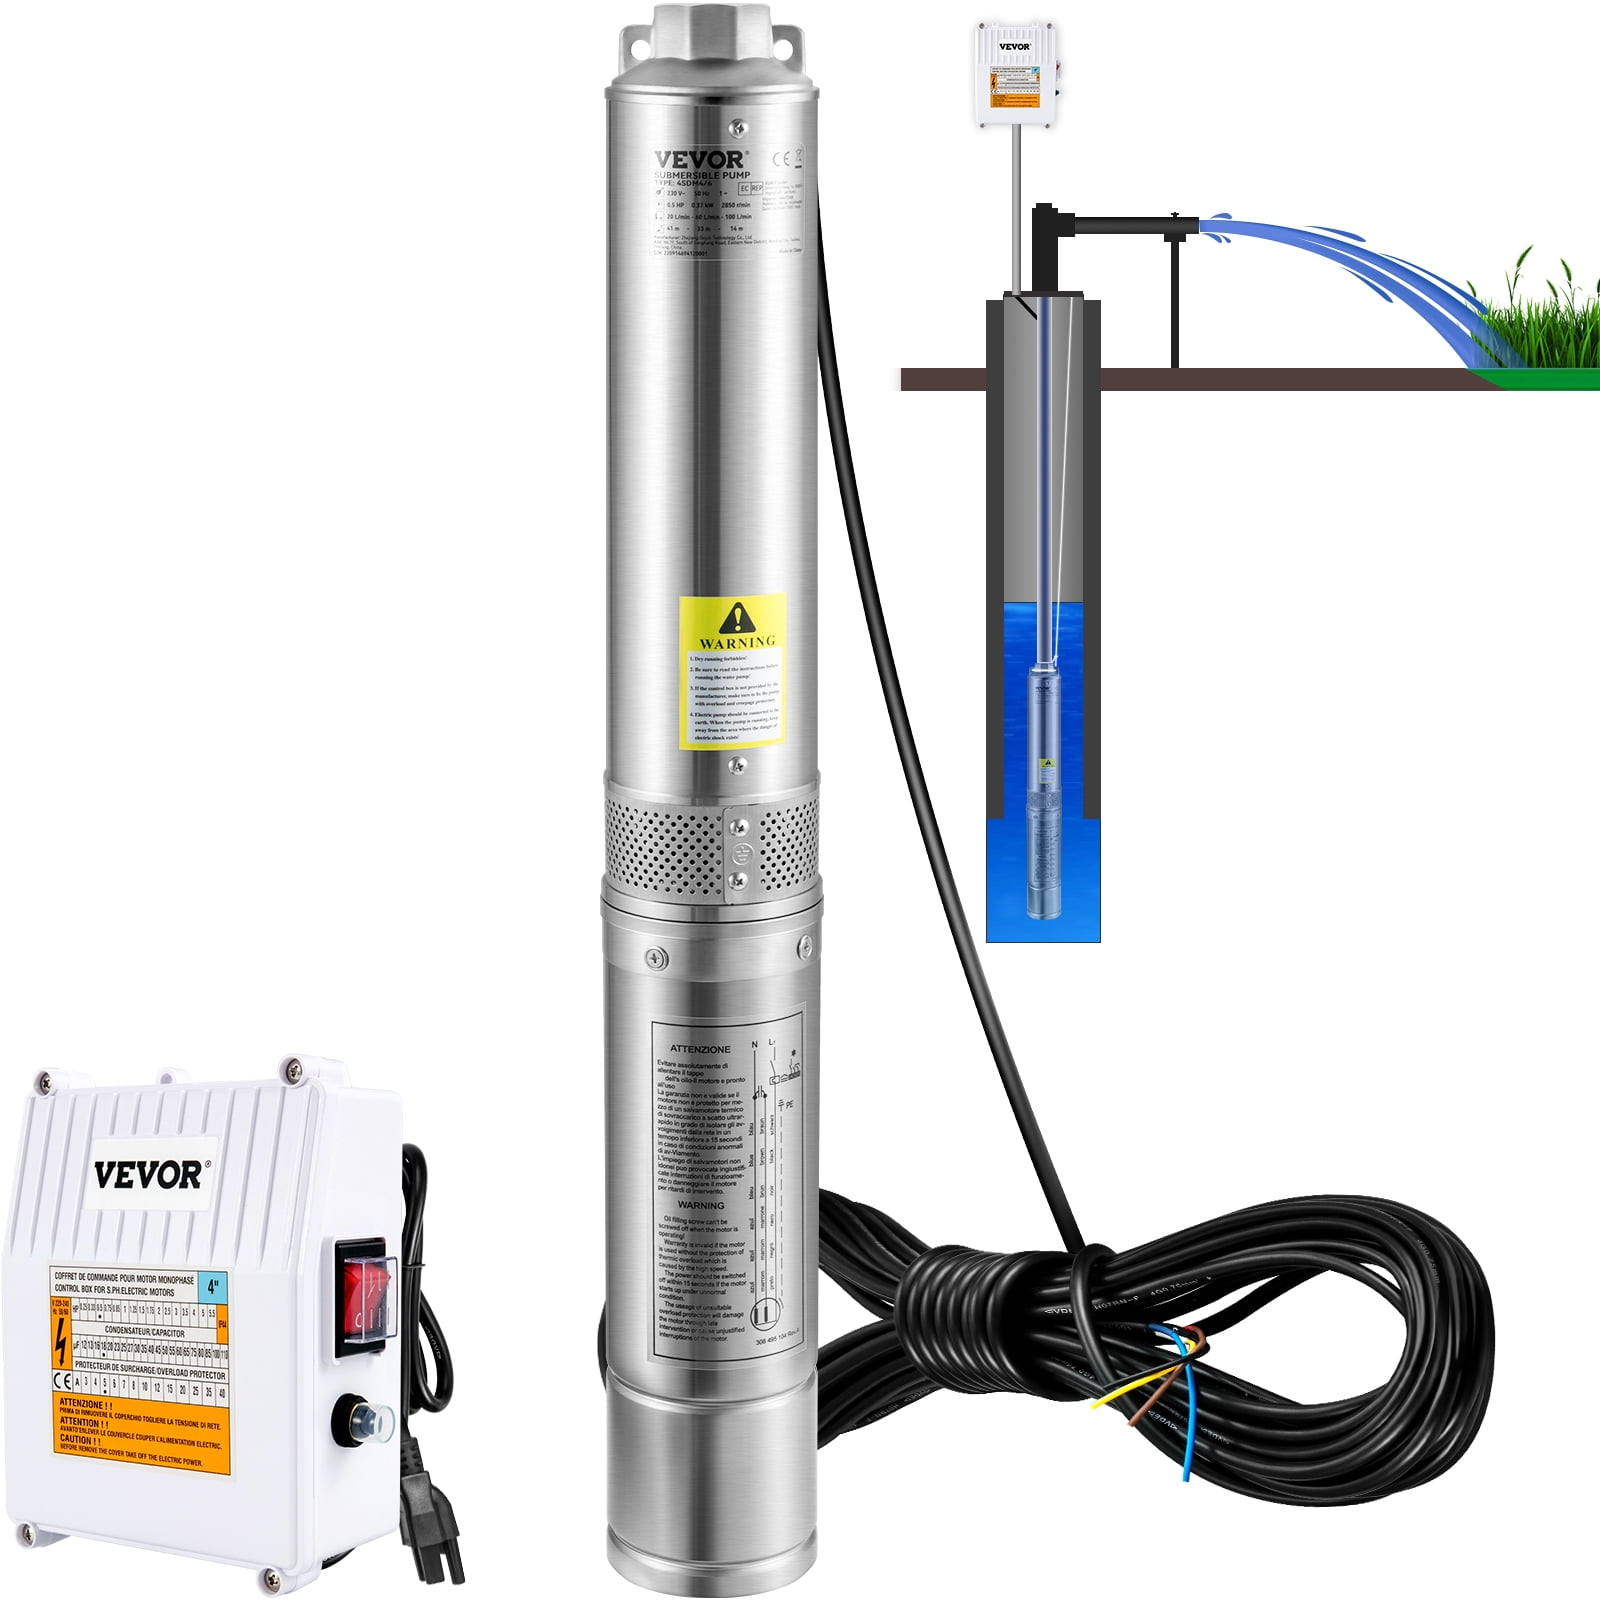 VEVOR Deep Well Submersible Pump, 2HP 230V/60Hz, 37GPM 427 ft Head, with 33  ft Cord  External Control Box, inch Stainless Steel Water Pumps for  Industrial, Irrigation and Home Use, IP68